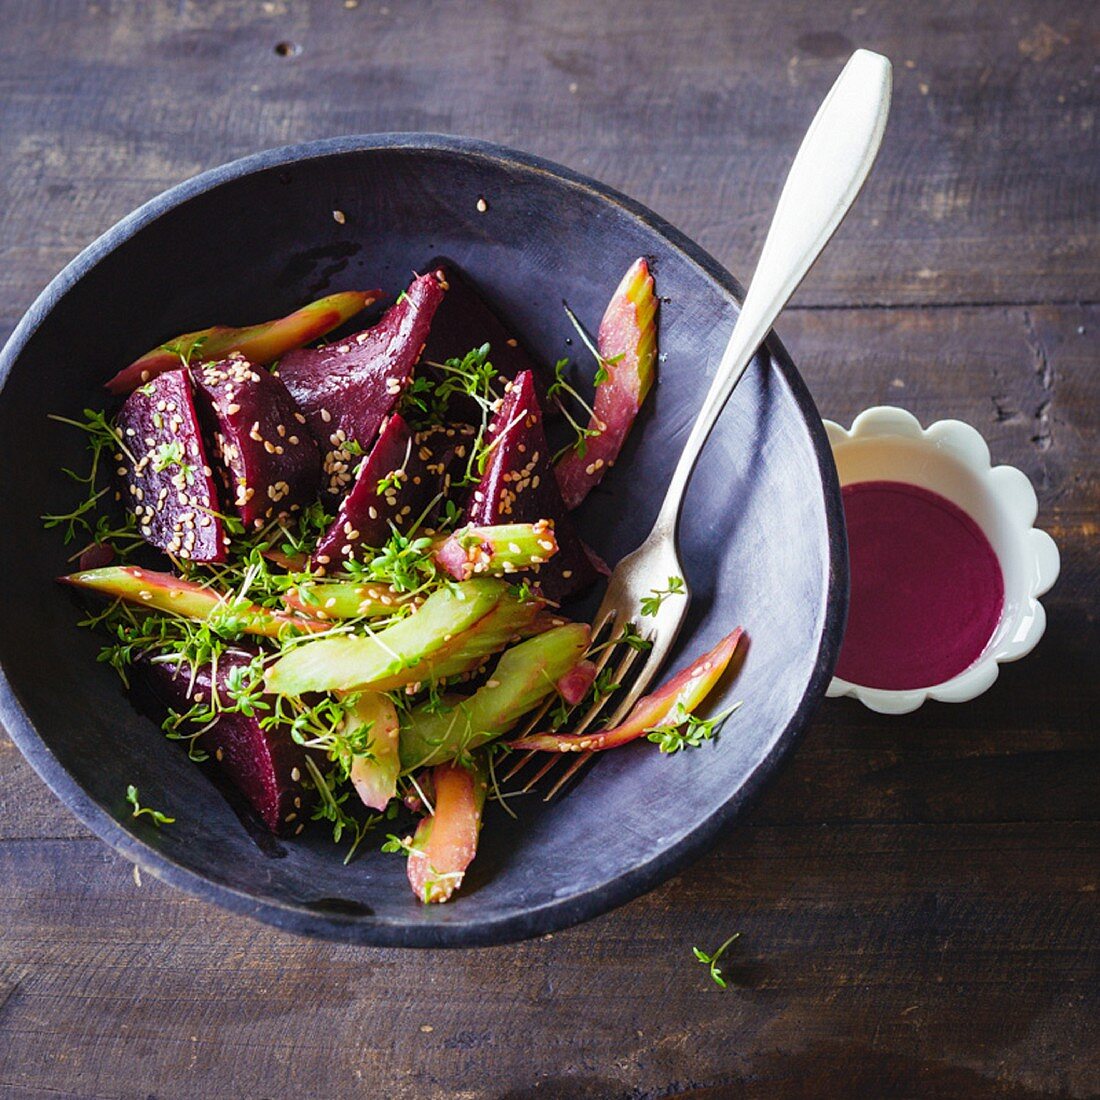 Warm beetroot salad with celery